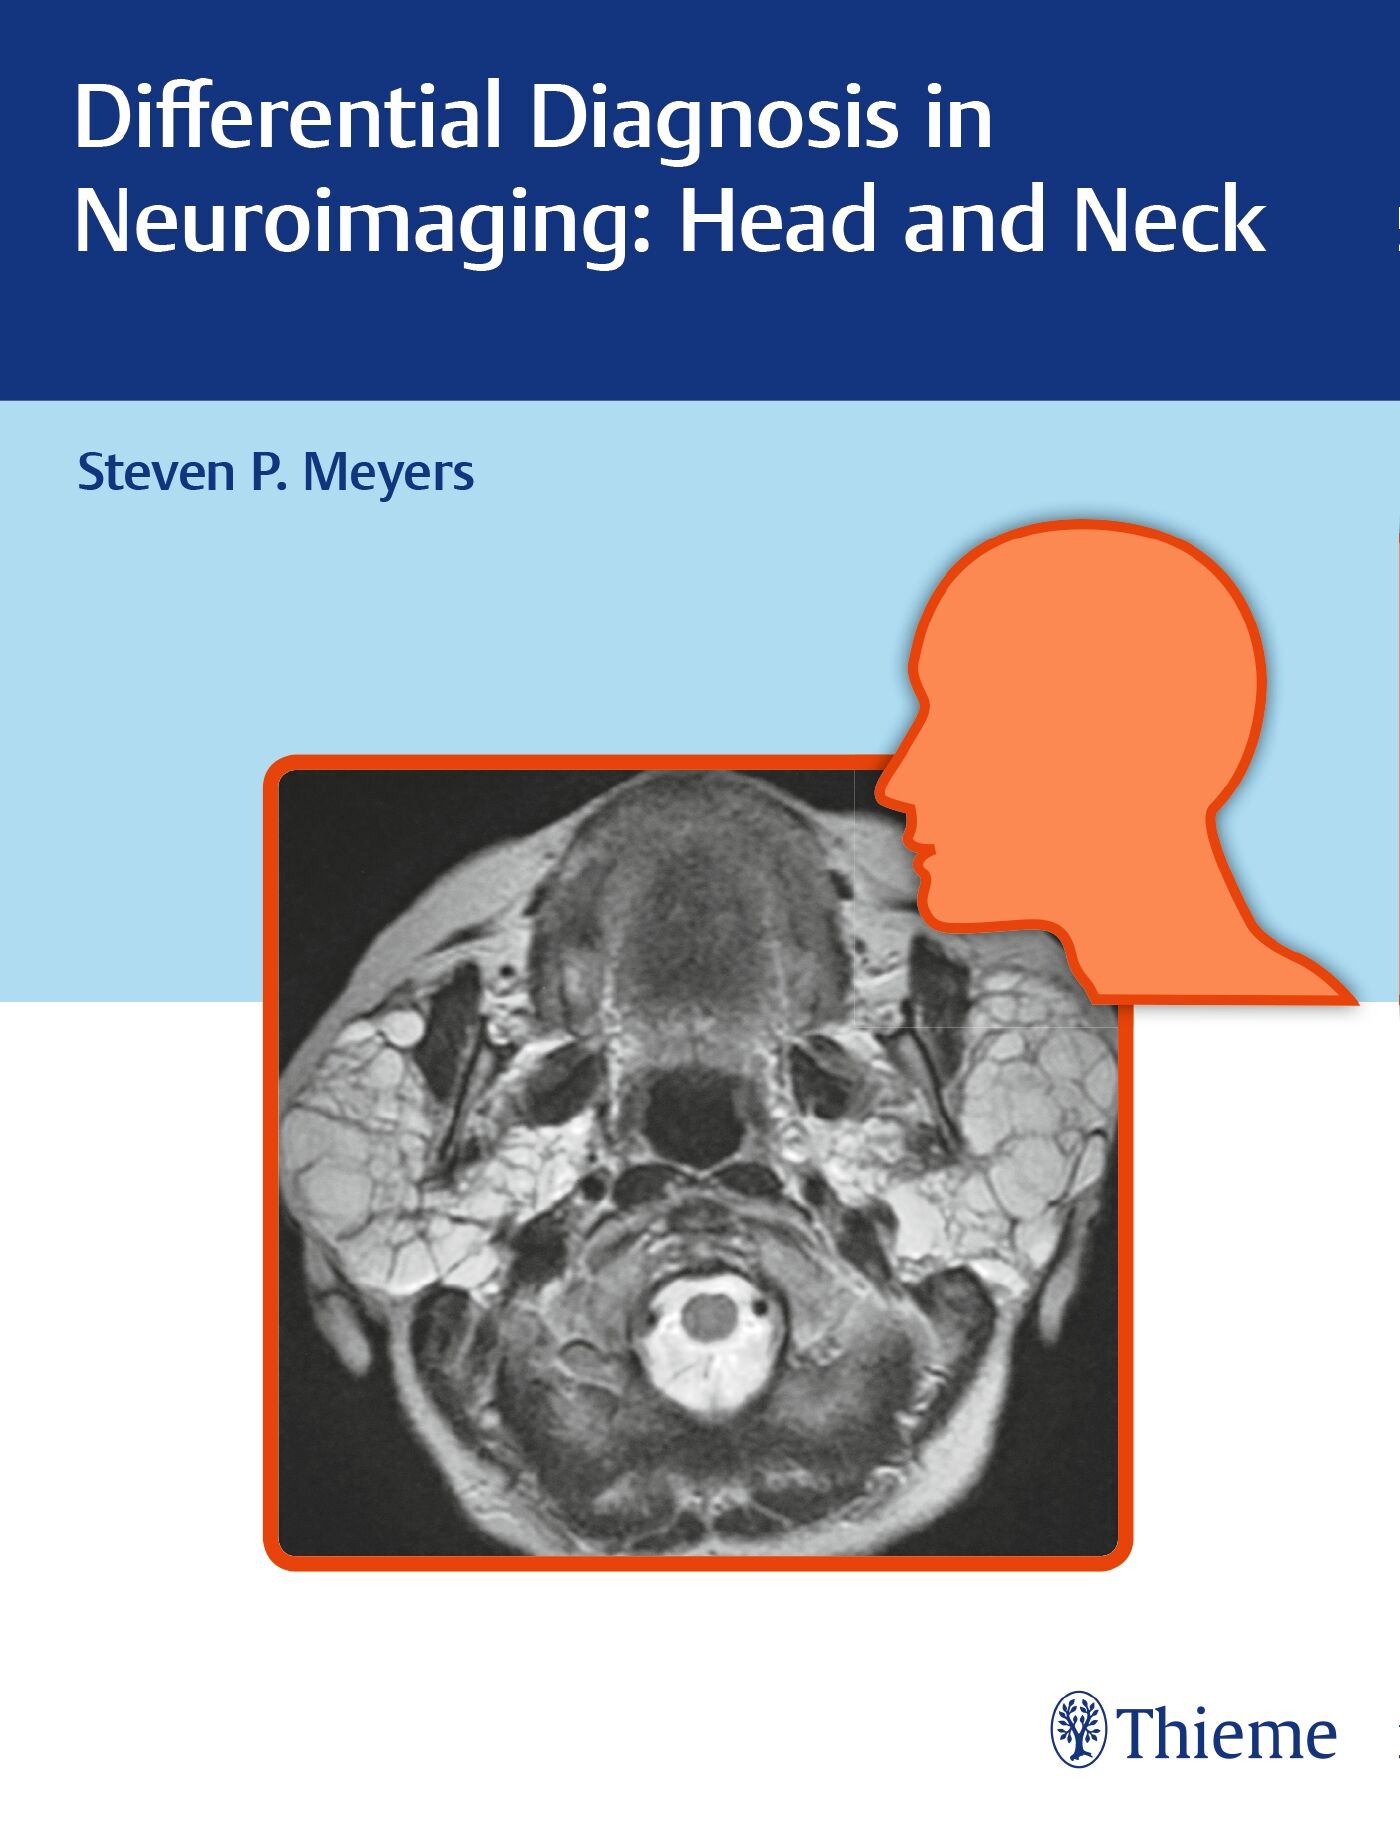 Differential Diagnosis in Neuroimaging: Head and Neck, 9781626234758